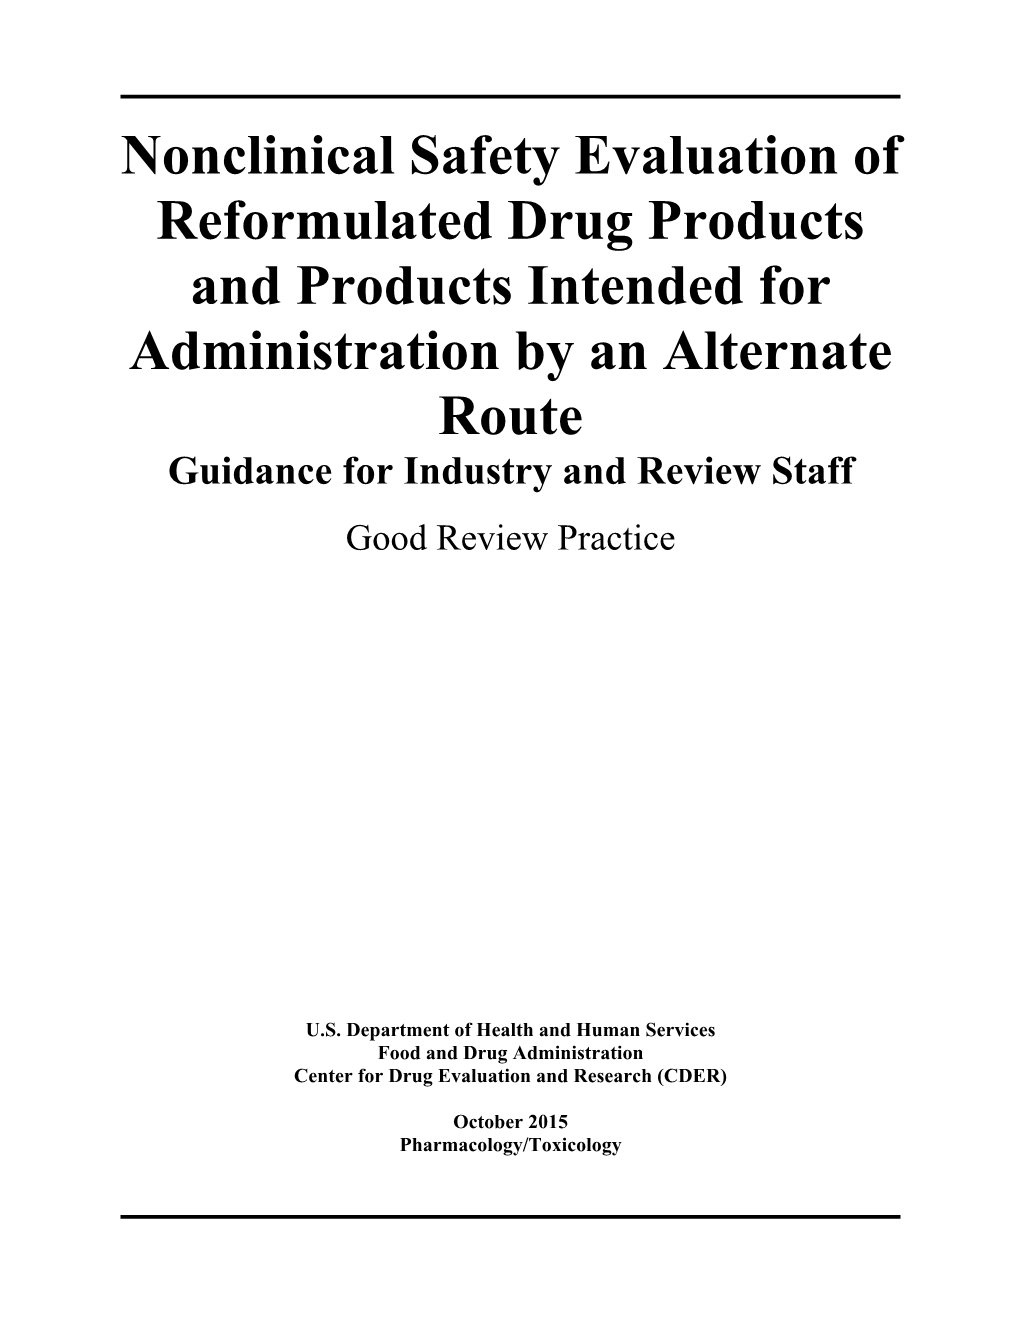 Nonclinical Safety Evaluation of Reformulated Drug Products and Products Intended for Administration by an Alternate Route Guidance for Industry and Review Staff